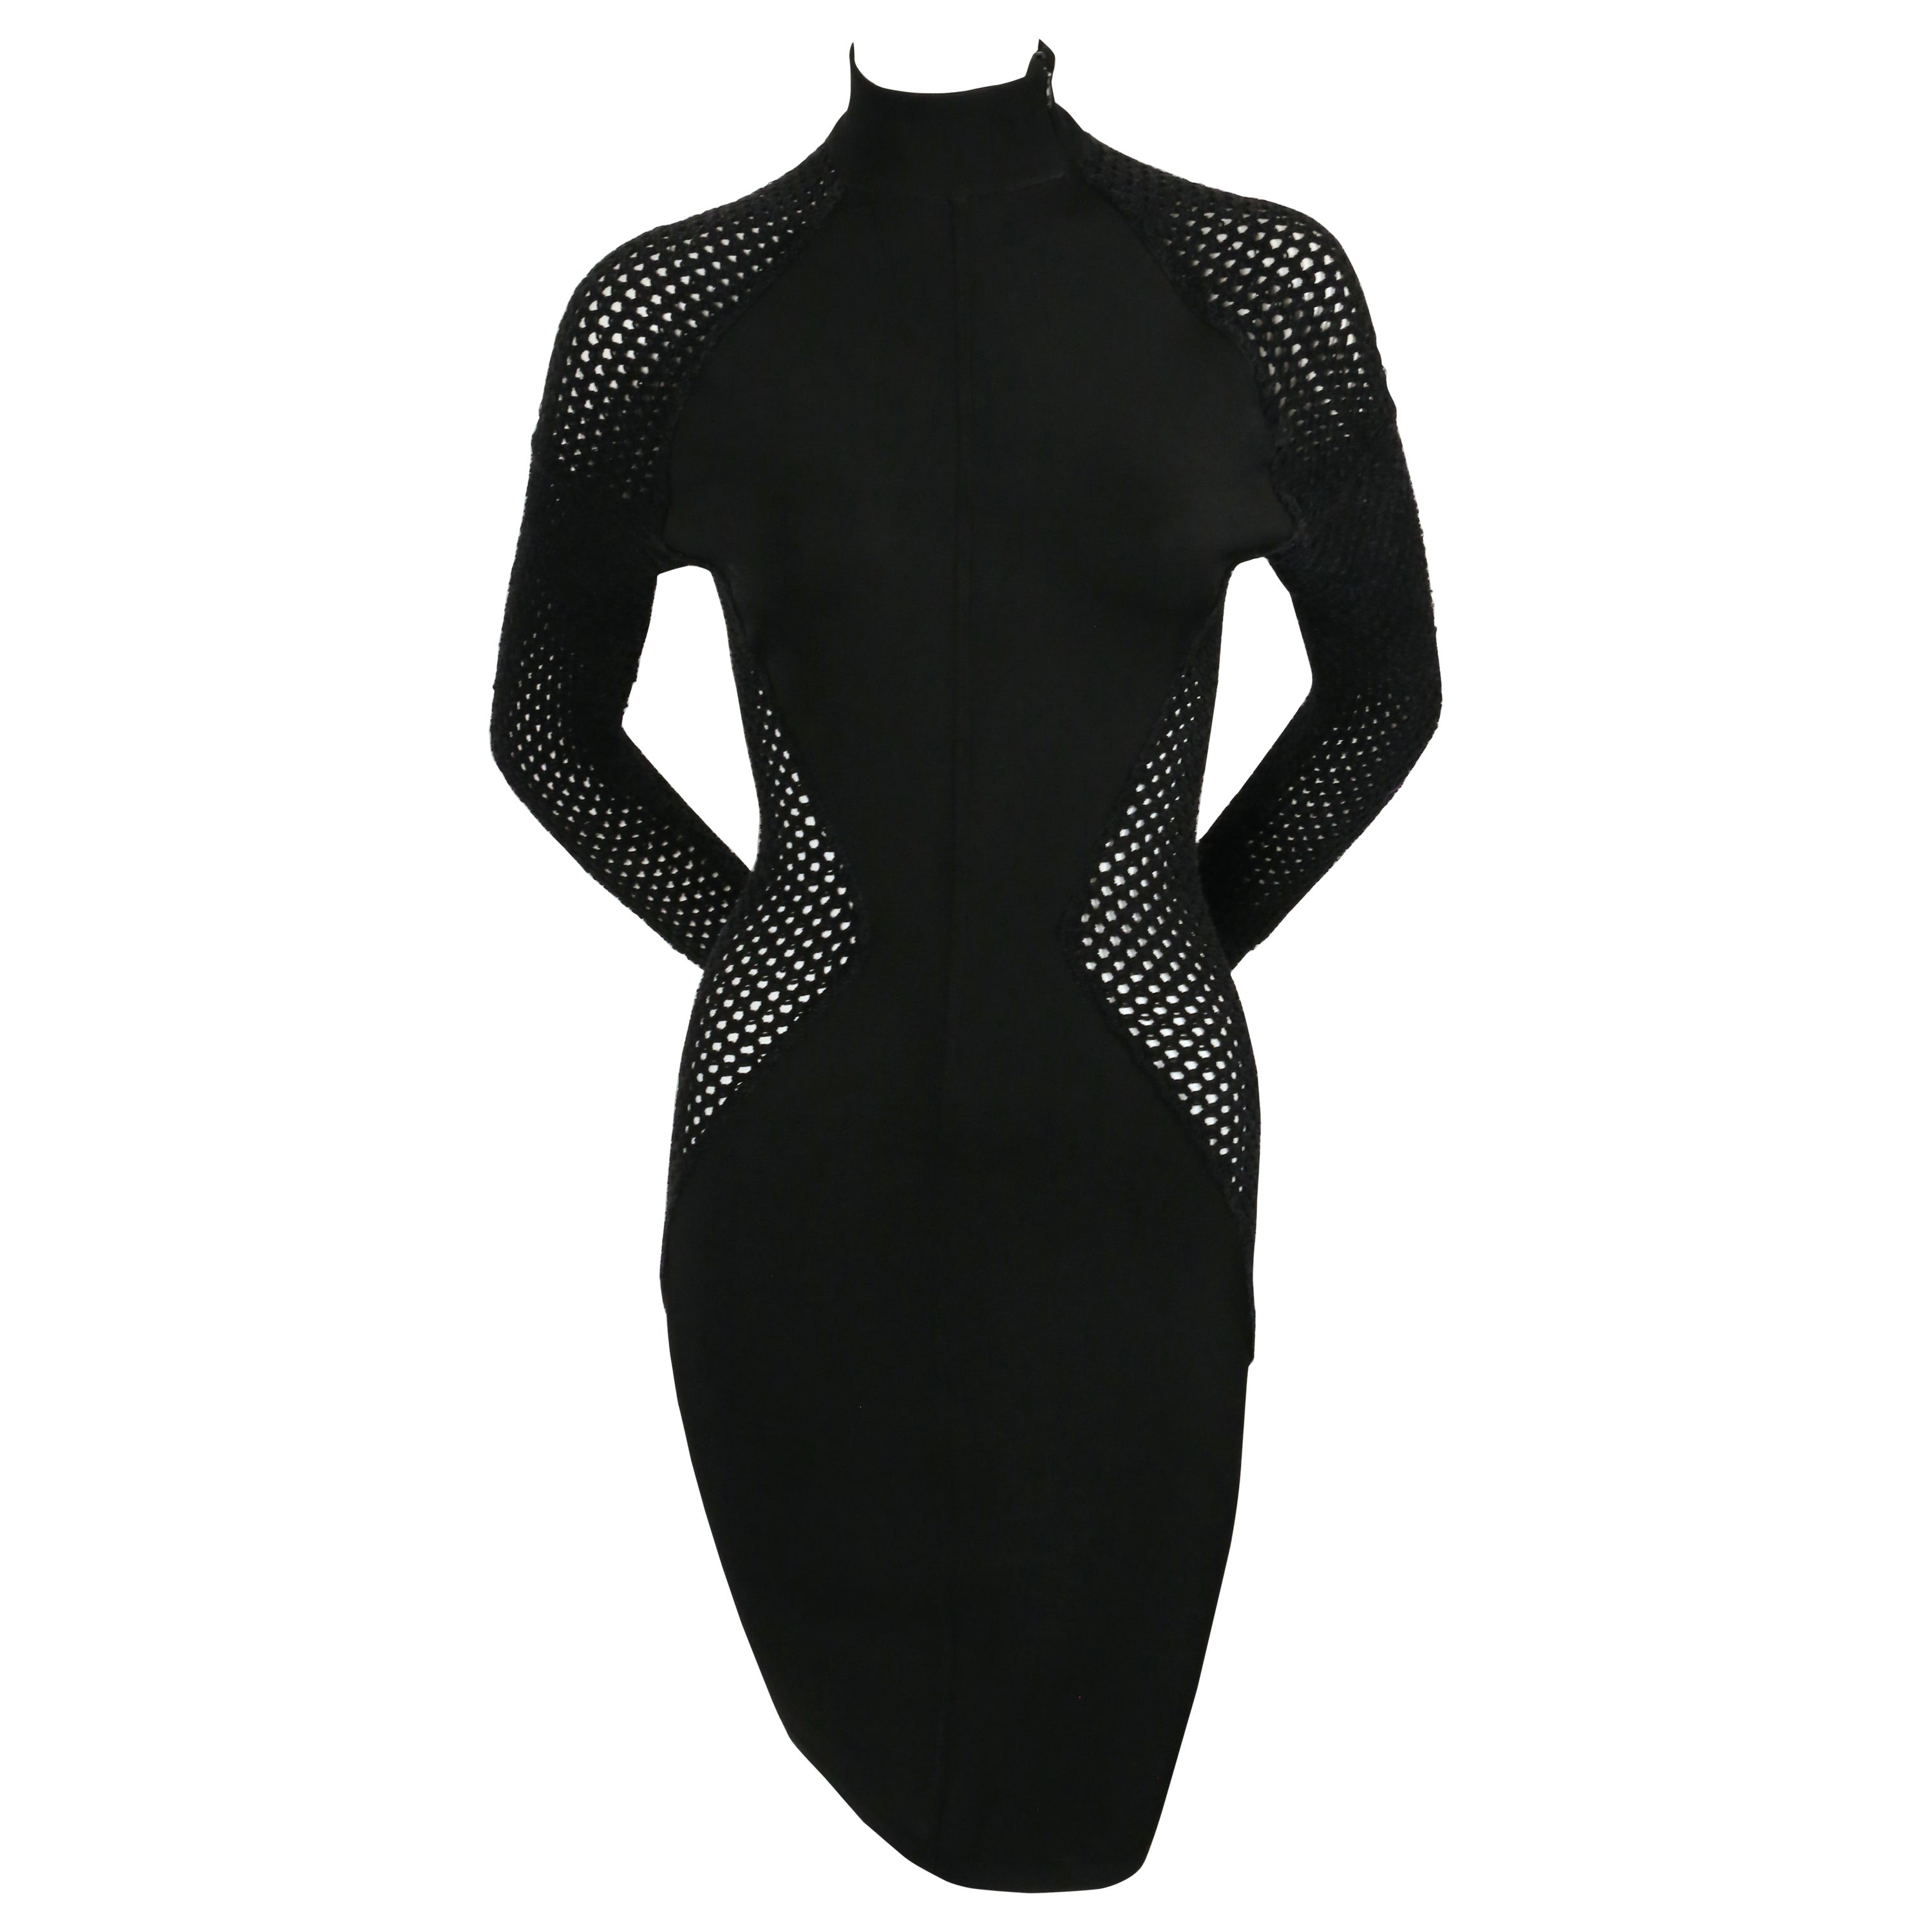 1989 AZZEDINE ALAIA black RUNWAY dress with sheer chenille panels For Sale